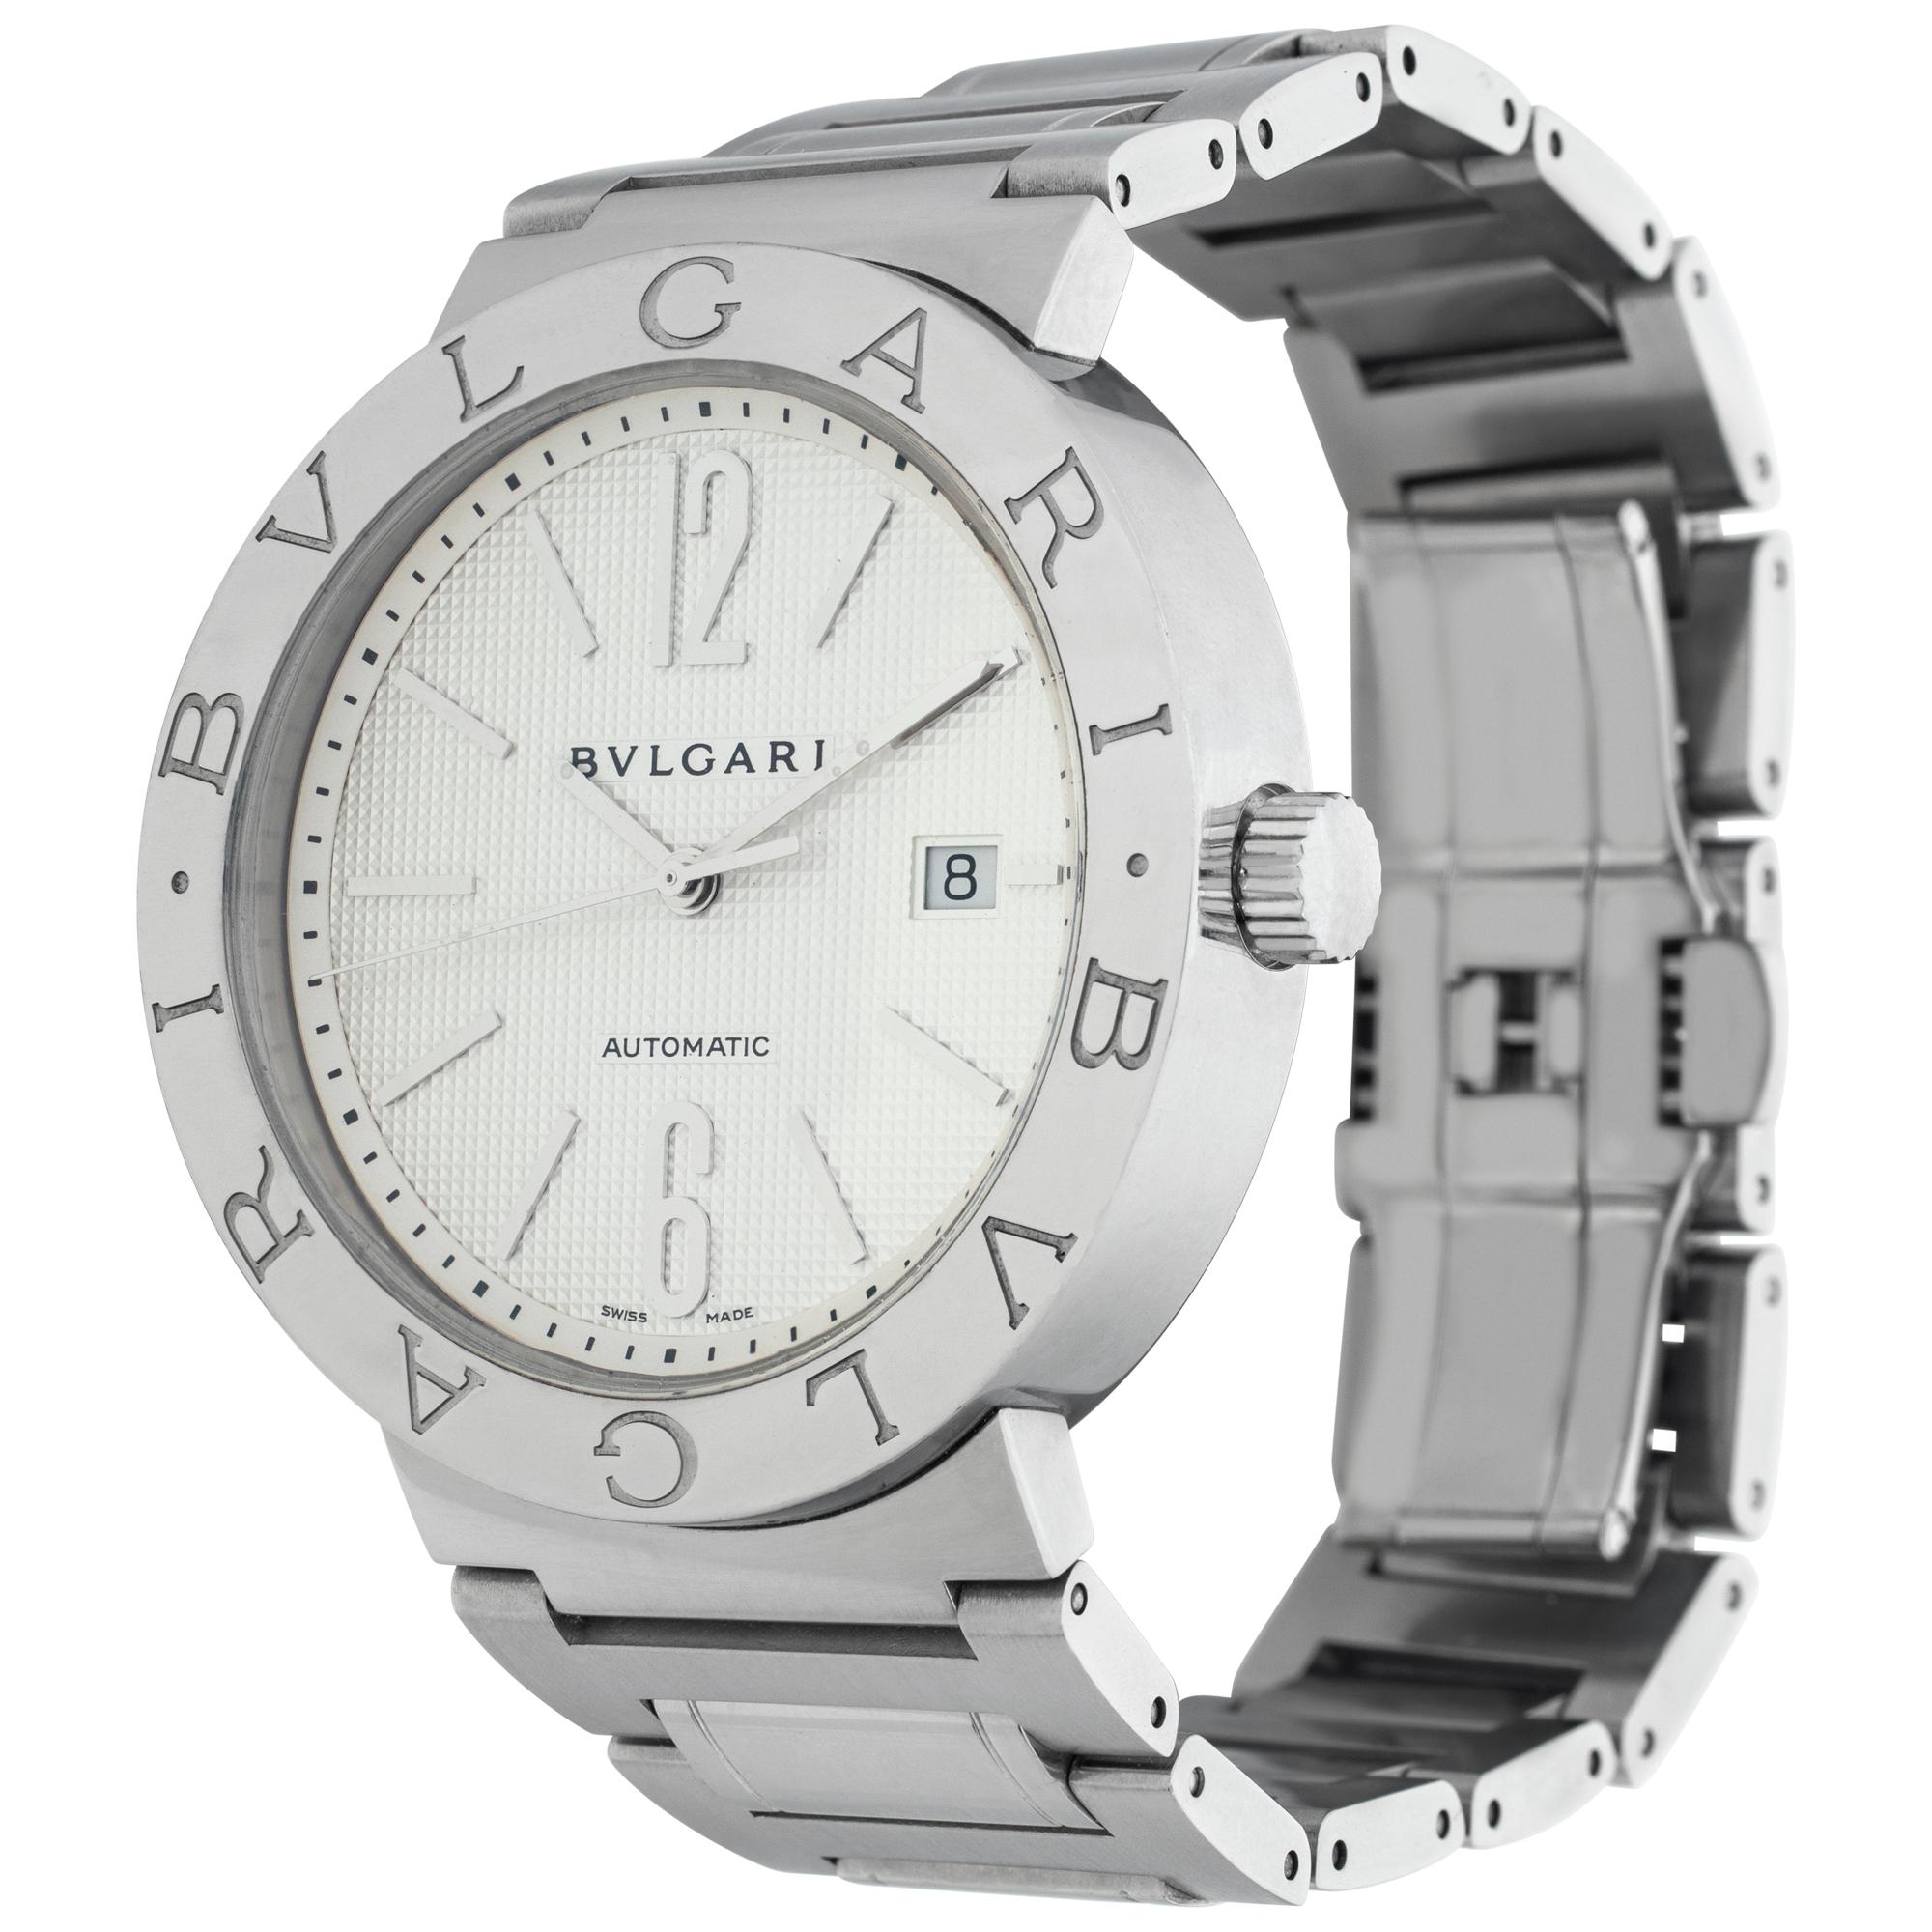 Bvlgari Bvlgari in stainless steel. Auto w/ sweep seconds and date. 42 mm case size. Ref BB 42 SS. With box. Circa 2000s. Fine Pre-owned Bvlgari / Bulgari Watch. Certified preowned Sport Bvlgari Bvlgari BB 42 SS watch is made out of Stainless steel